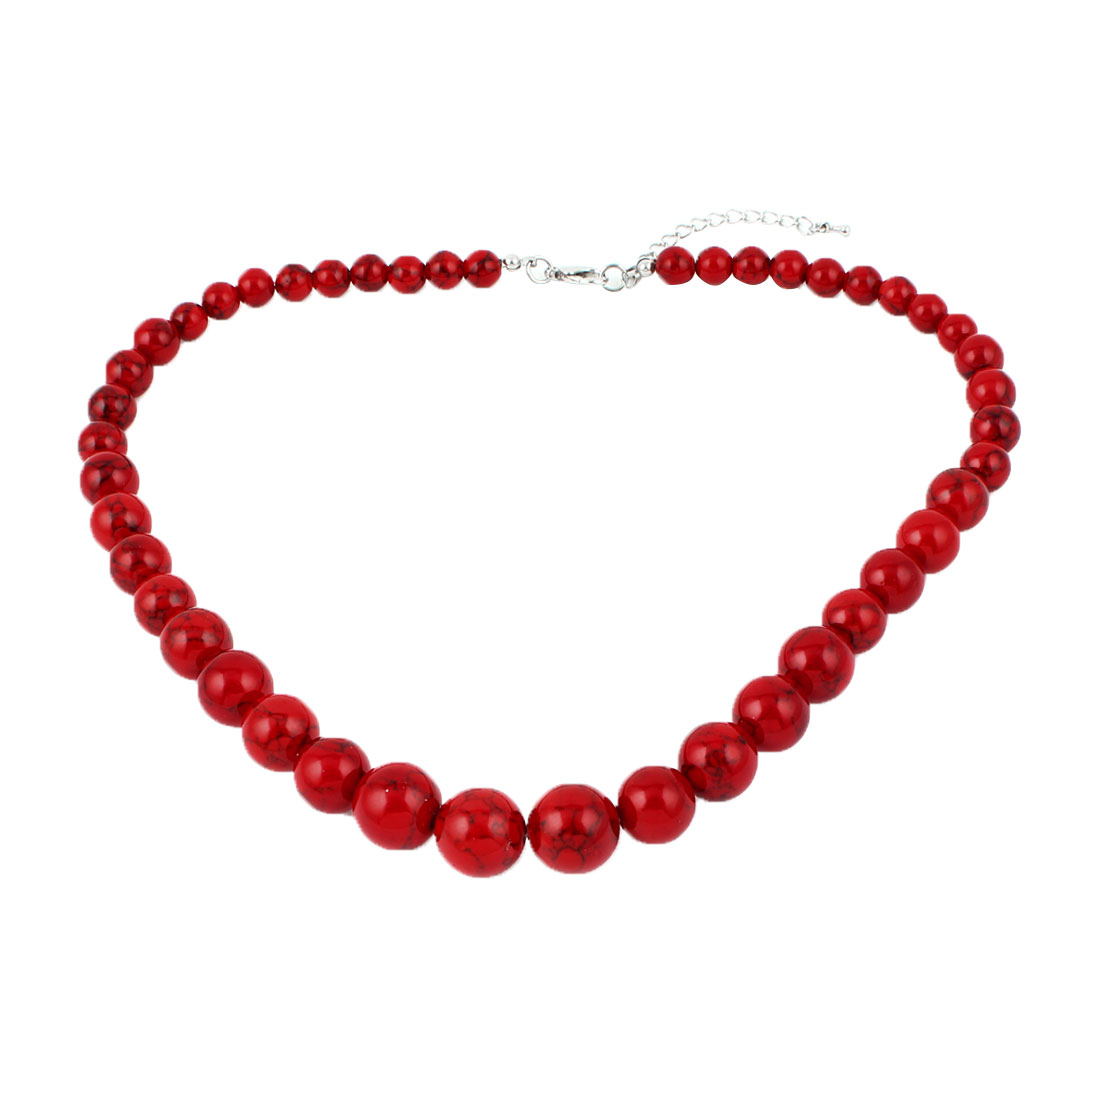 Retro Style Red Round Turquoise Beads String Bib Chain Necklace for Lady |  Walmart Canada